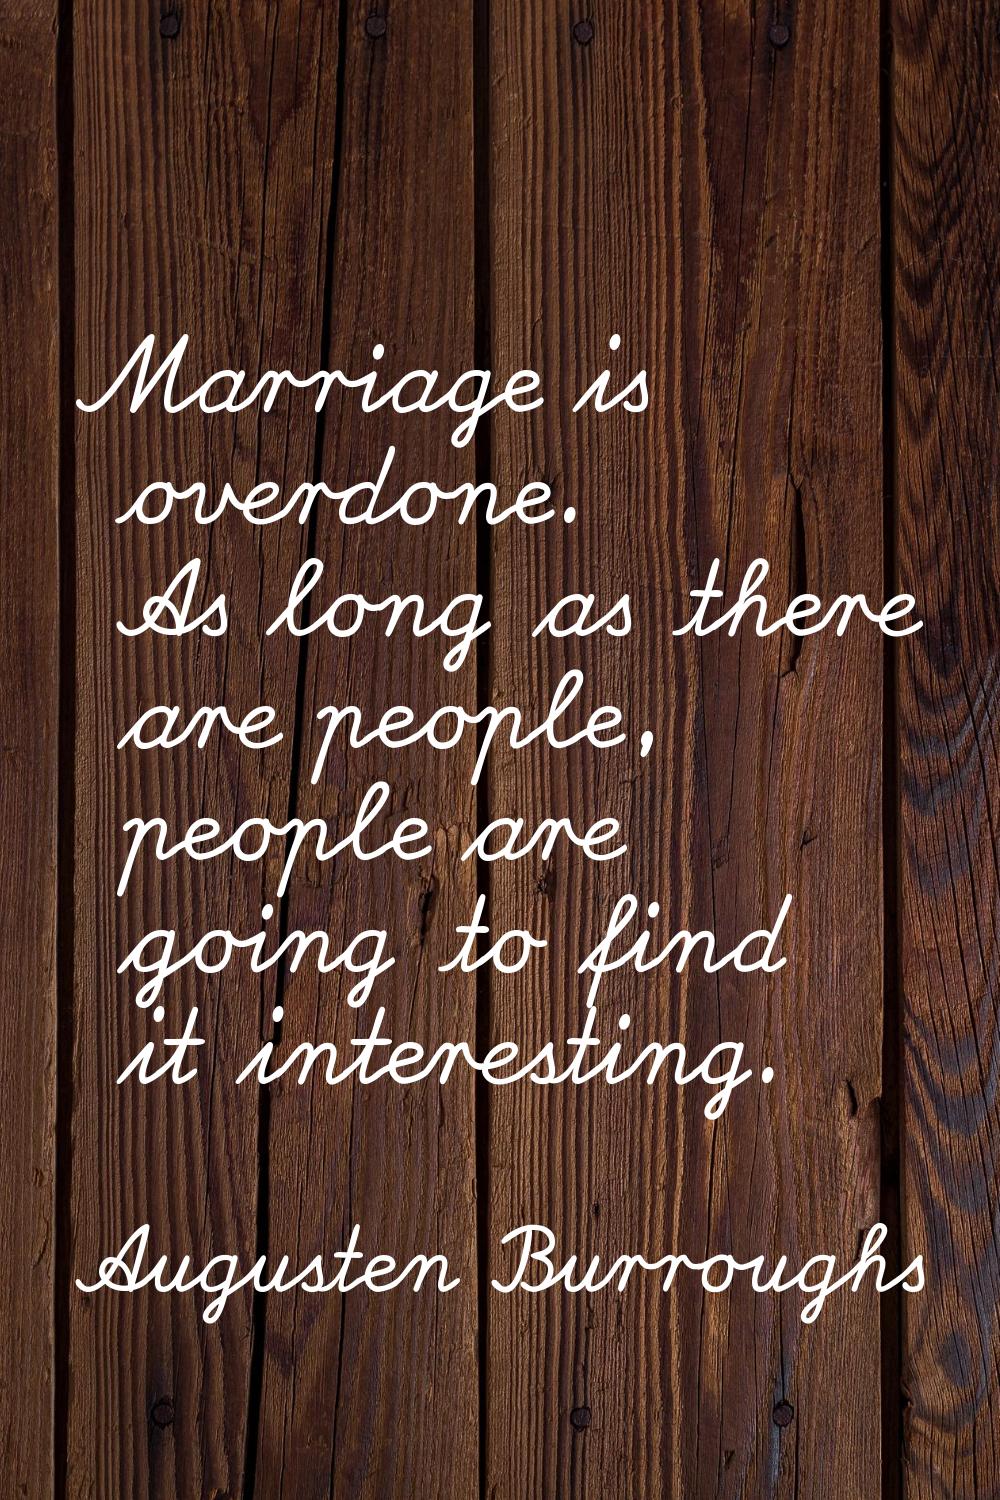 Marriage is overdone. As long as there are people, people are going to find it interesting.